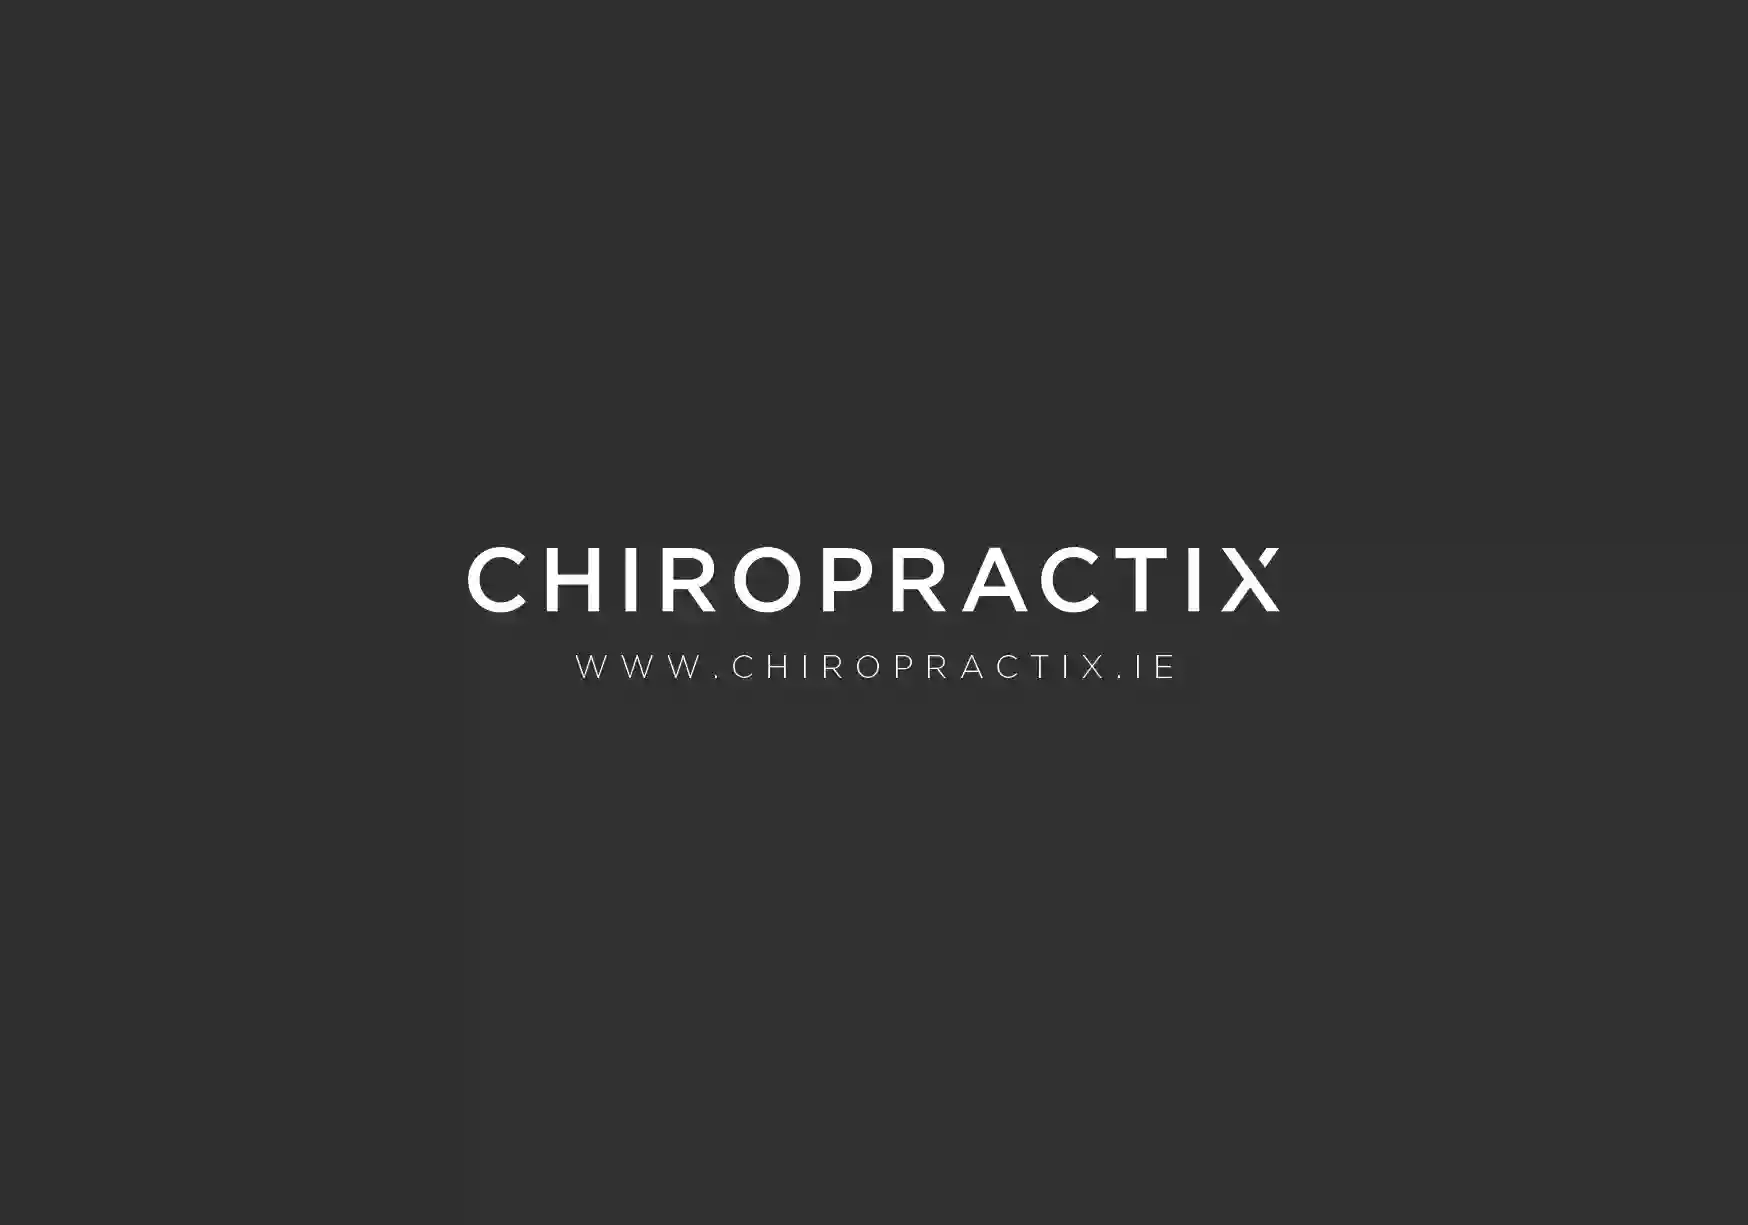 Chiropractix - Carrick on Shannon